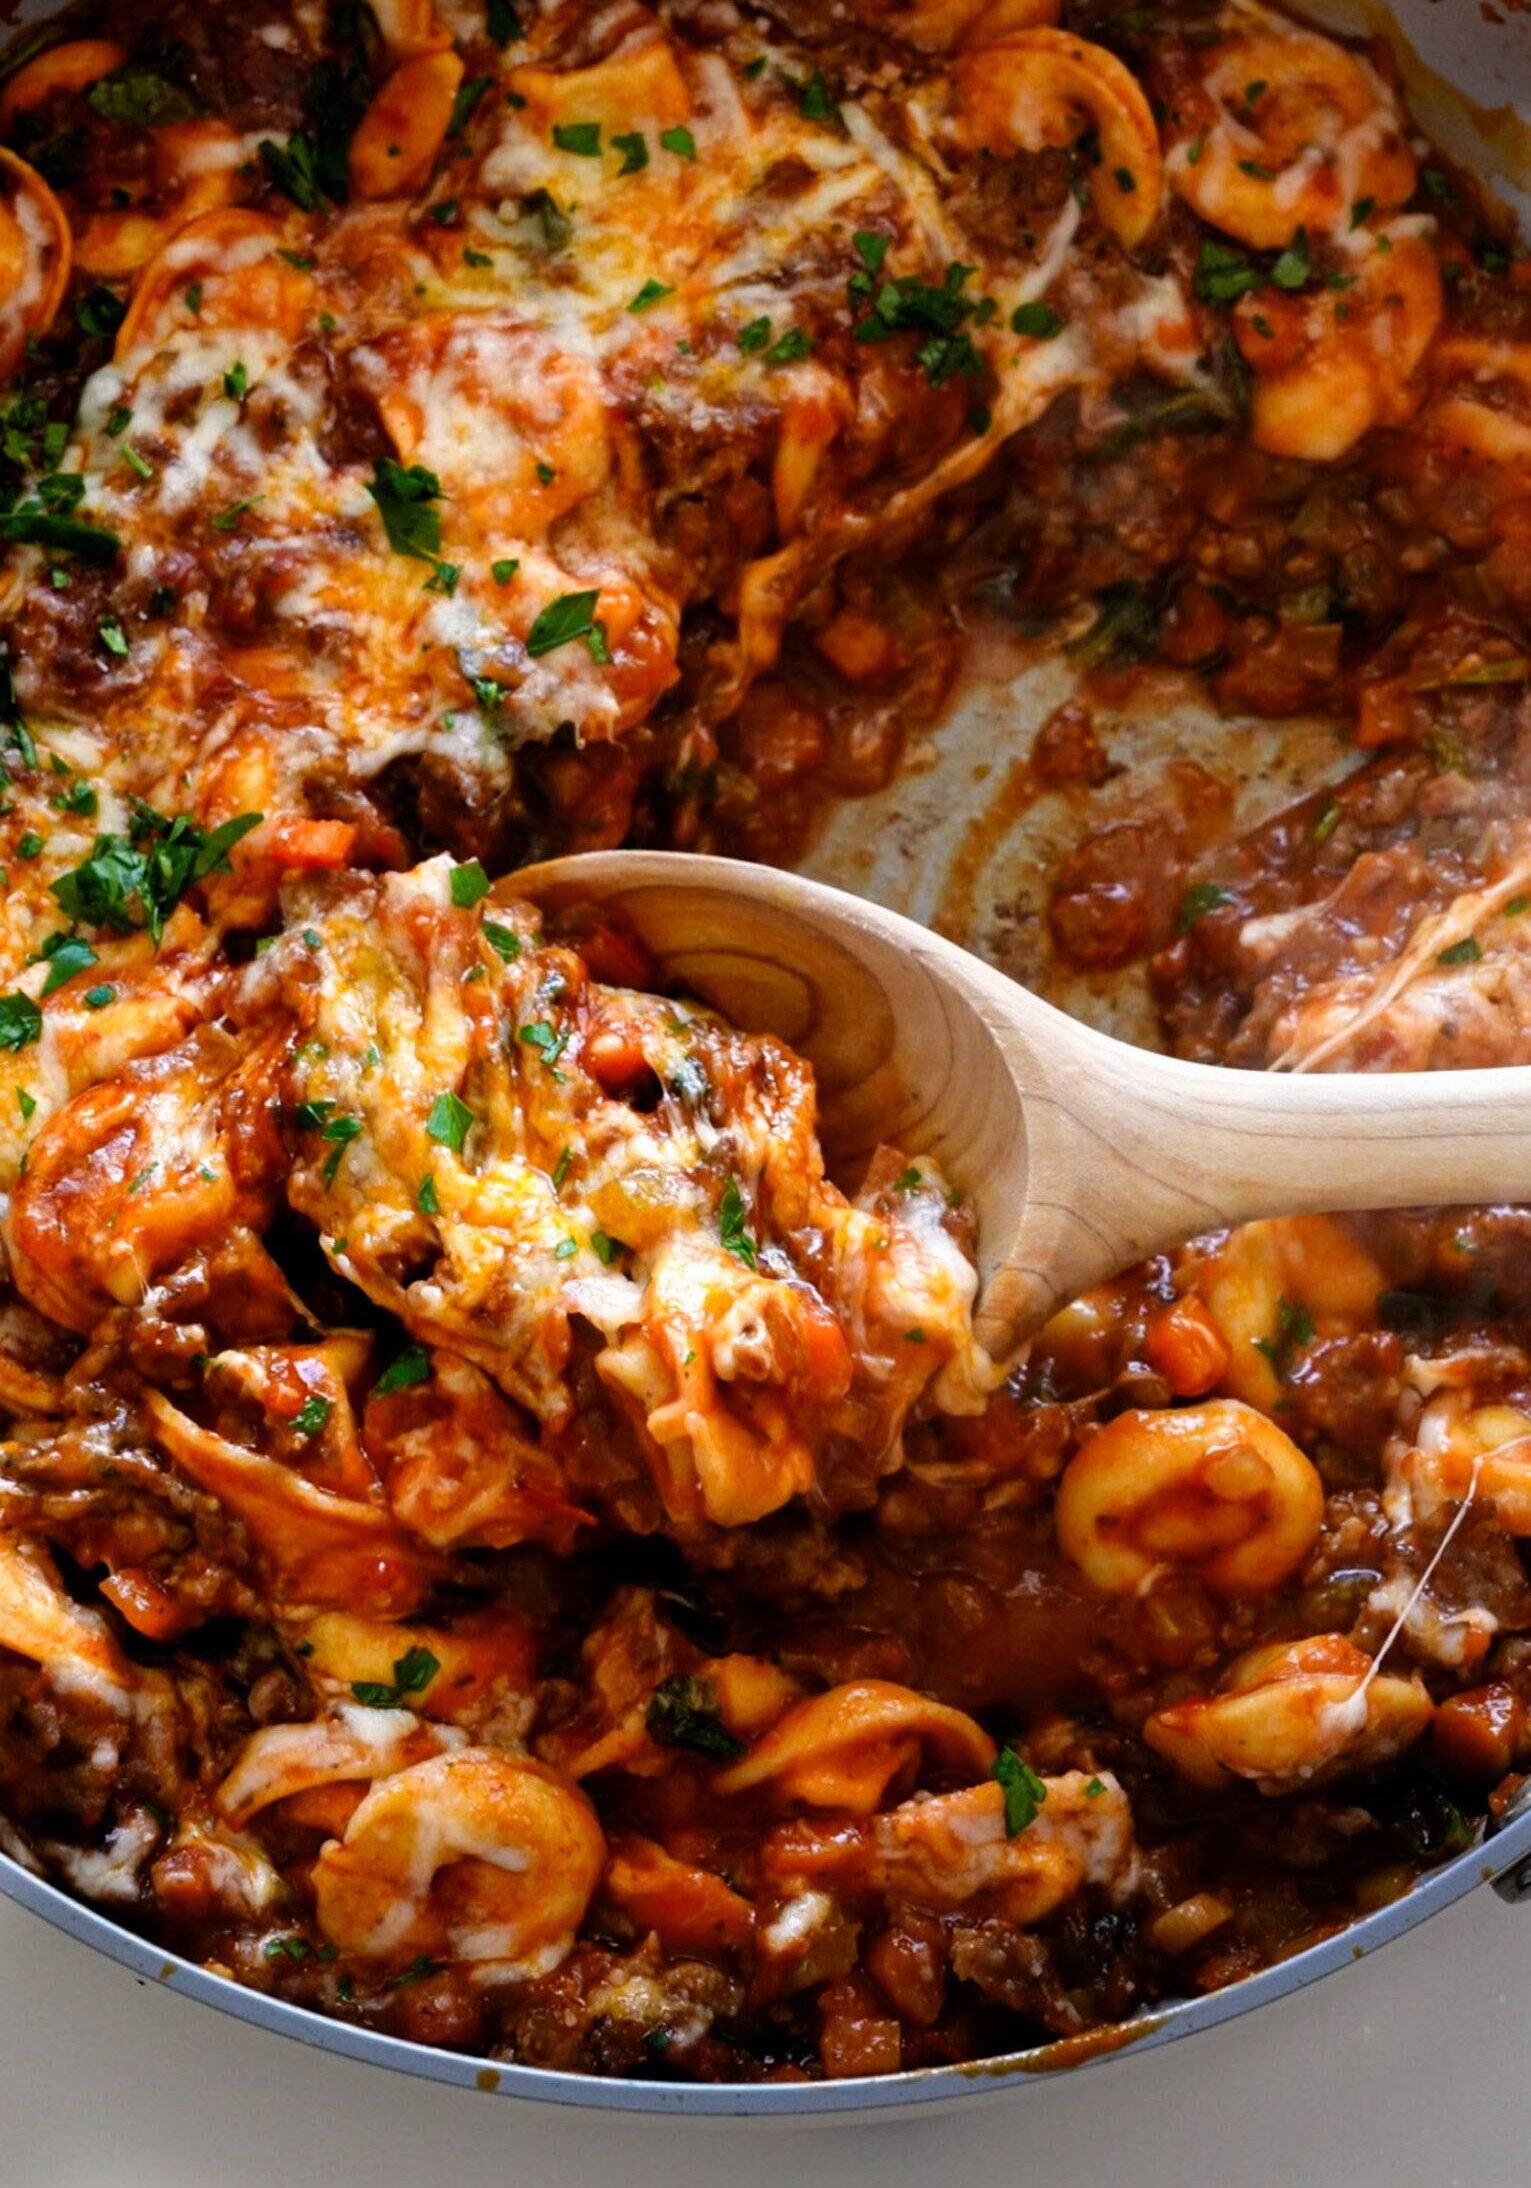 Baked Tortellini with Sausage